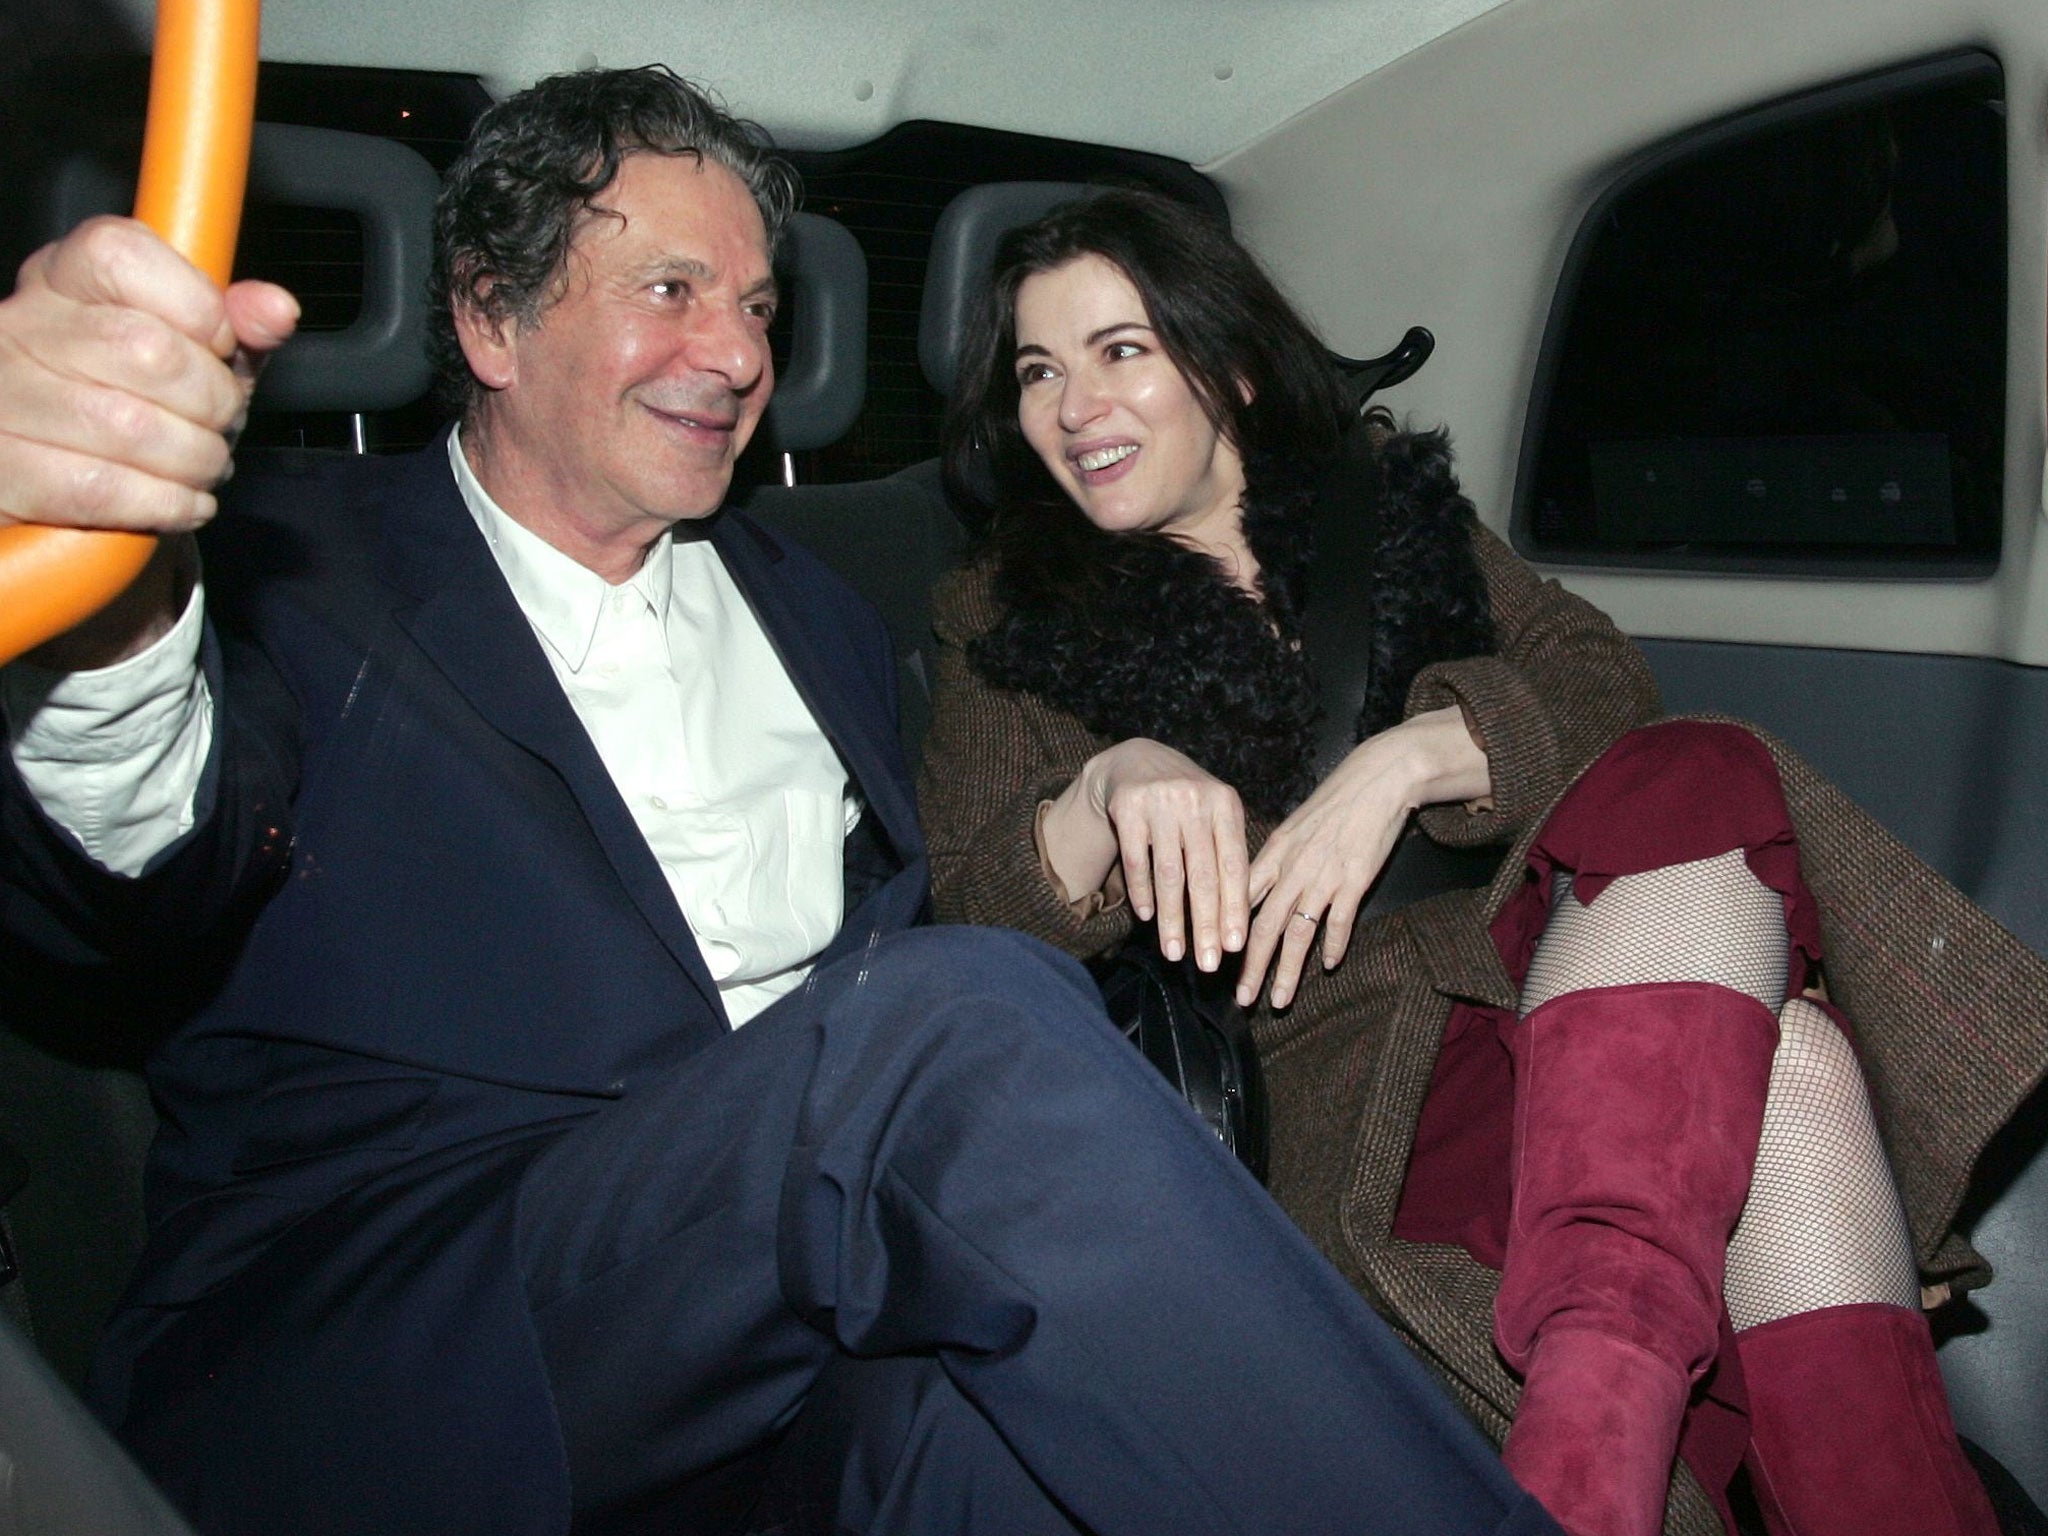 Charles Saatchi is reportedly not afraid to use his daughter as a 'bargaining chip' in war of words with former wife Nigella Lawson